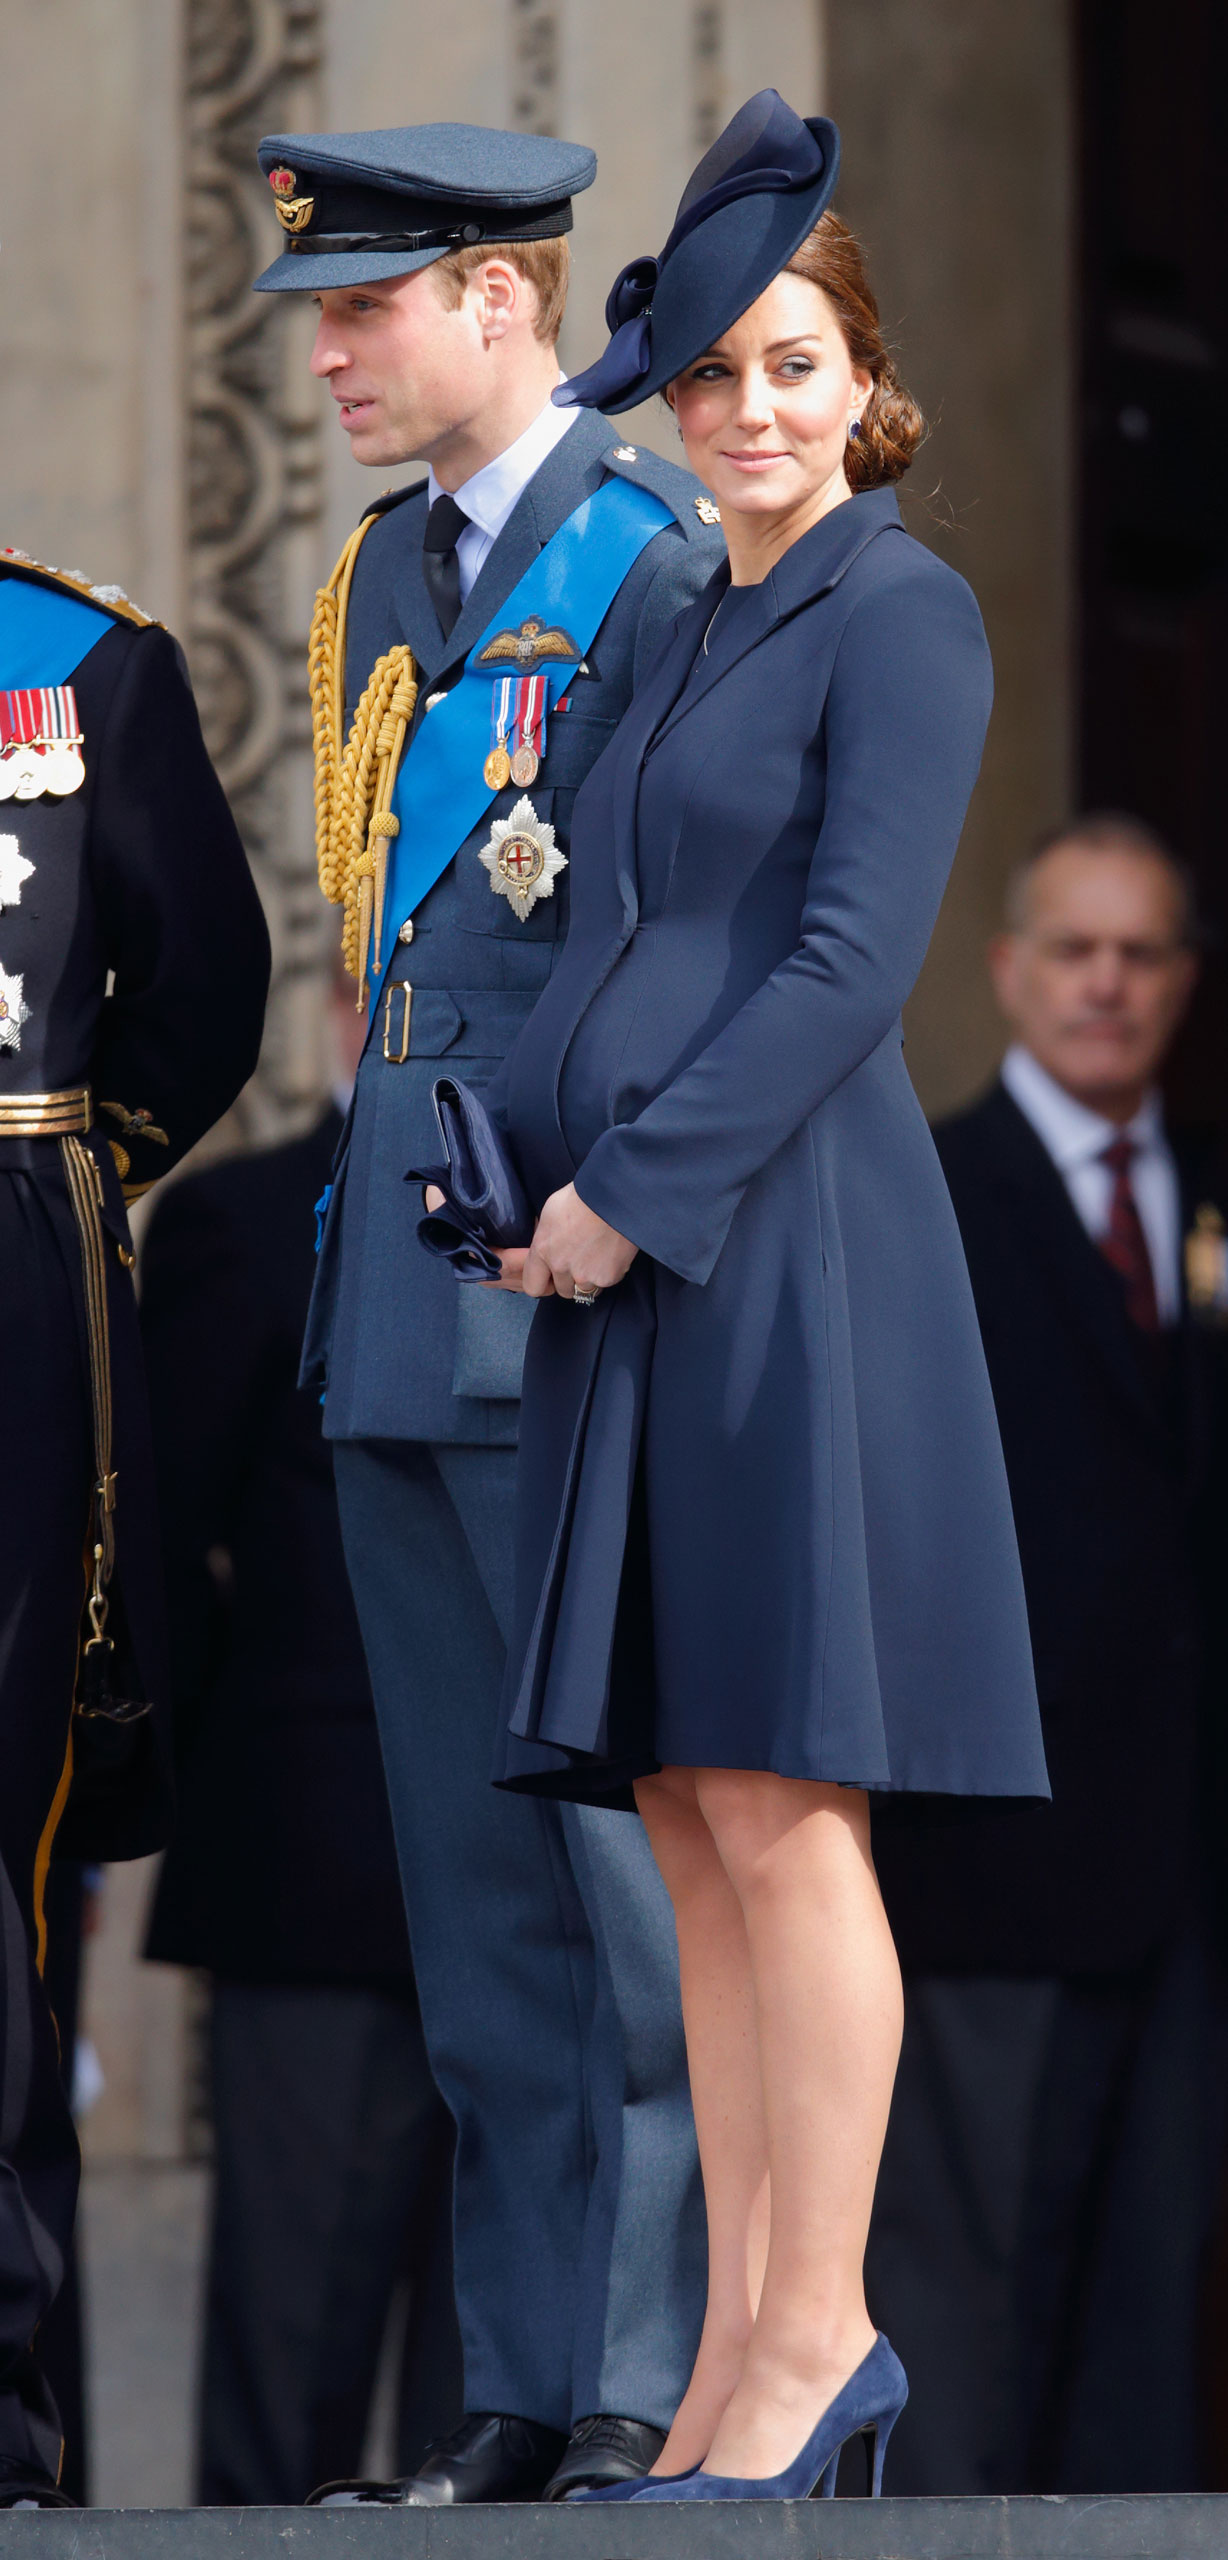 Prince William, Duke of Cambridge and Catherine, Duchess of Cambridge attend a Service of Commemoration to mark the end of combat operations in Afghanistan at St Paul's Cathedral on March 13, 2015 in London.